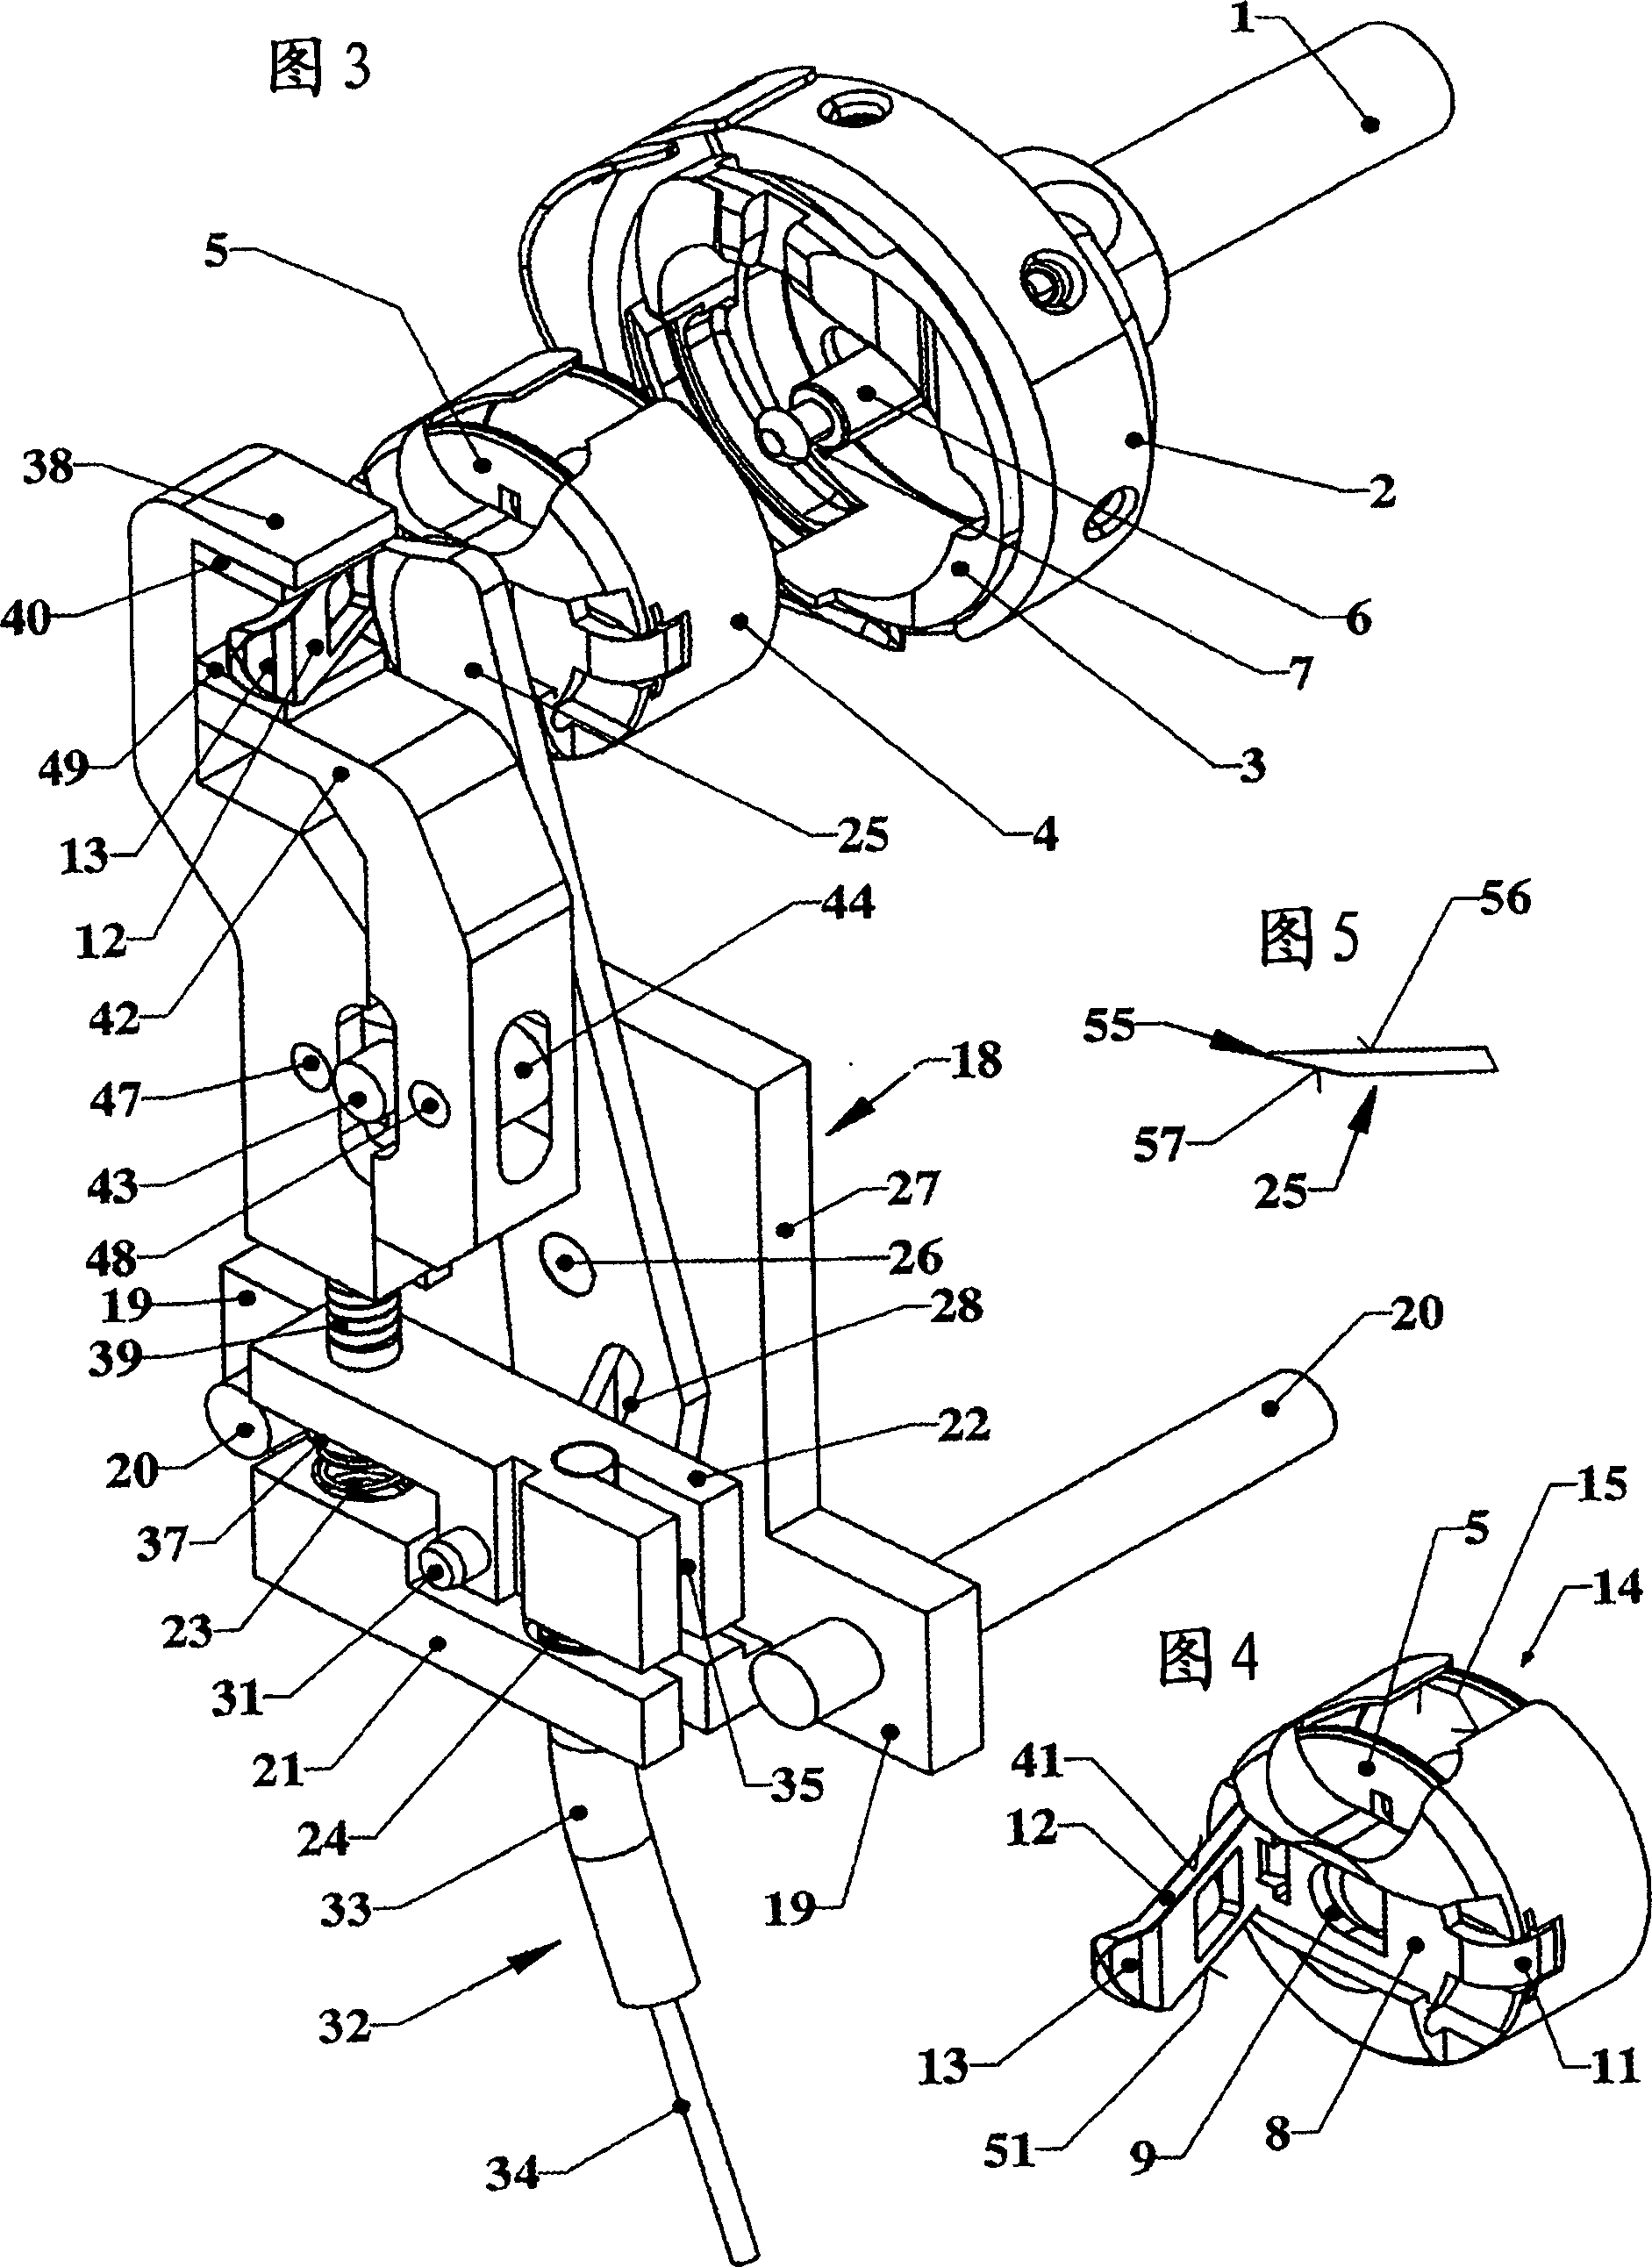 Device for sewing or knitting machines for changing the spool for the looper thread